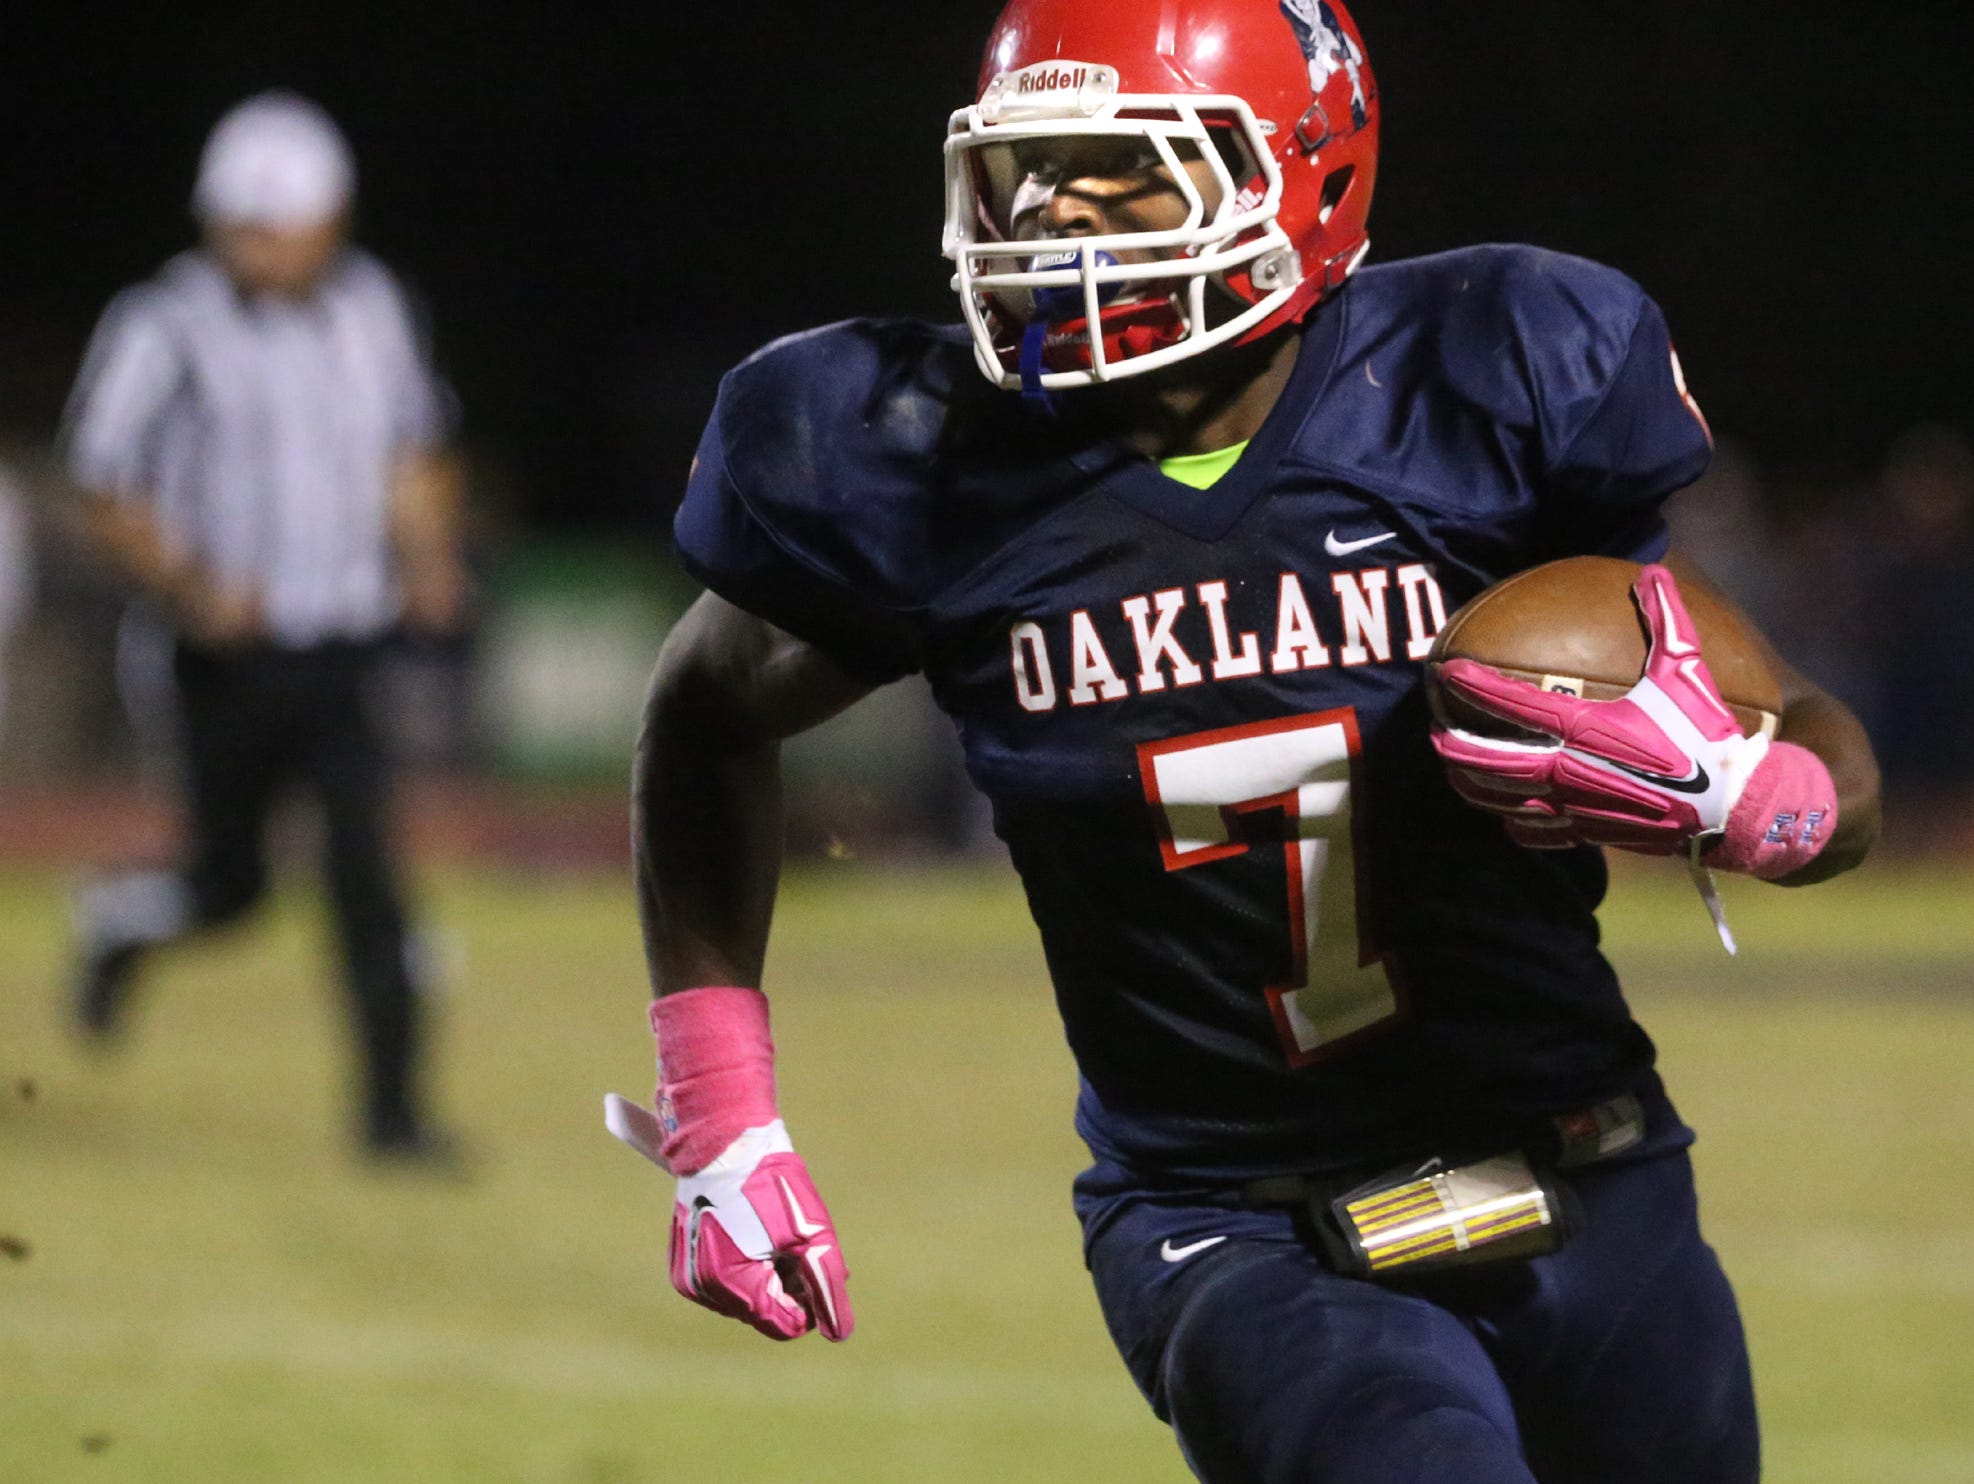 Oakland senior JaCoby Stevens recently committed to LSU.